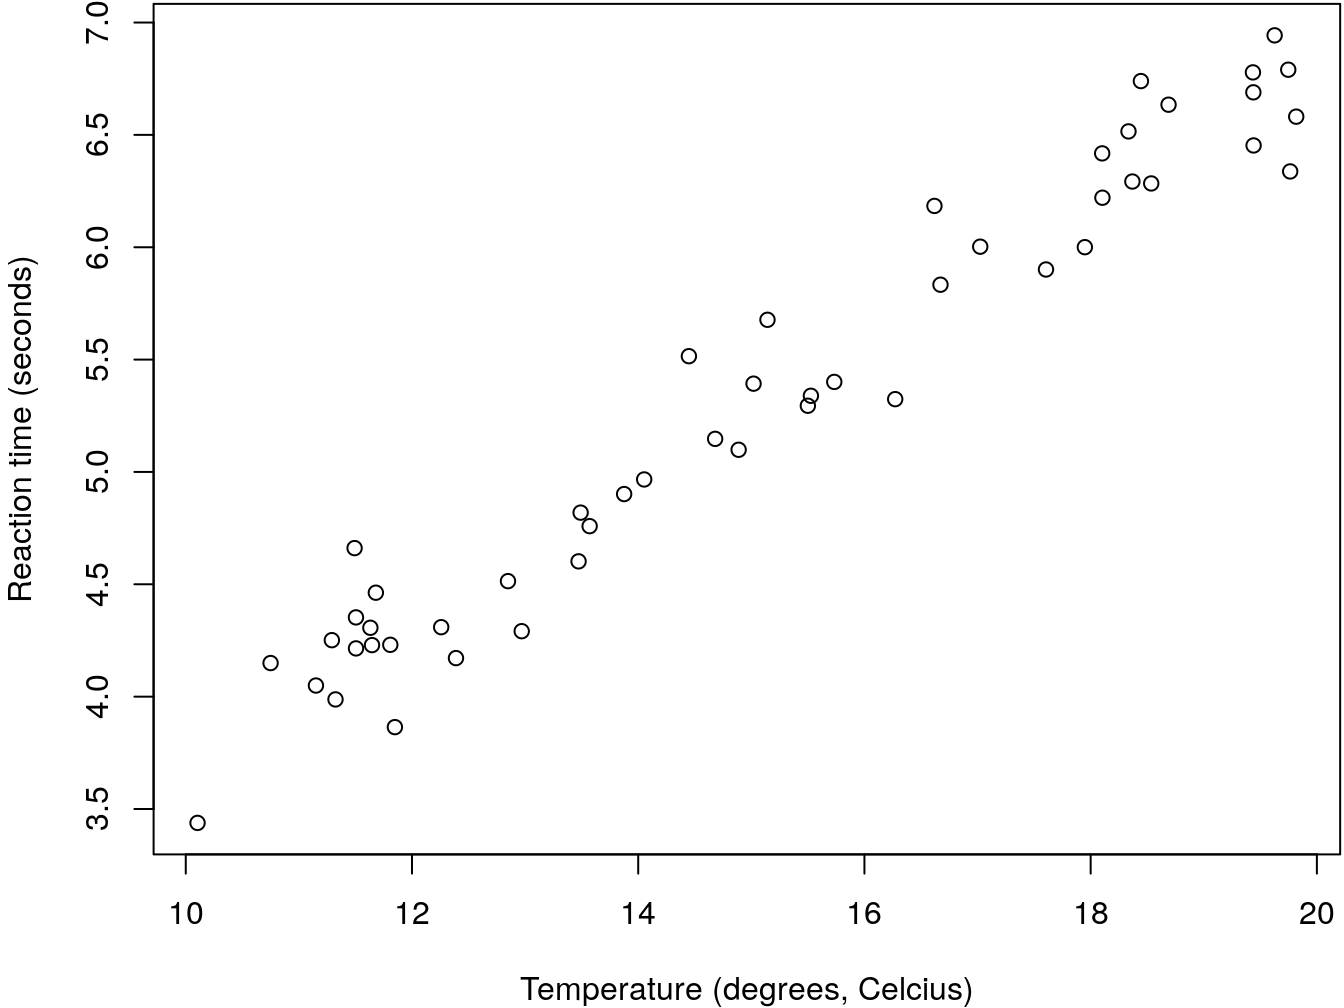 An example regression data set that could be eplained by a linear regression